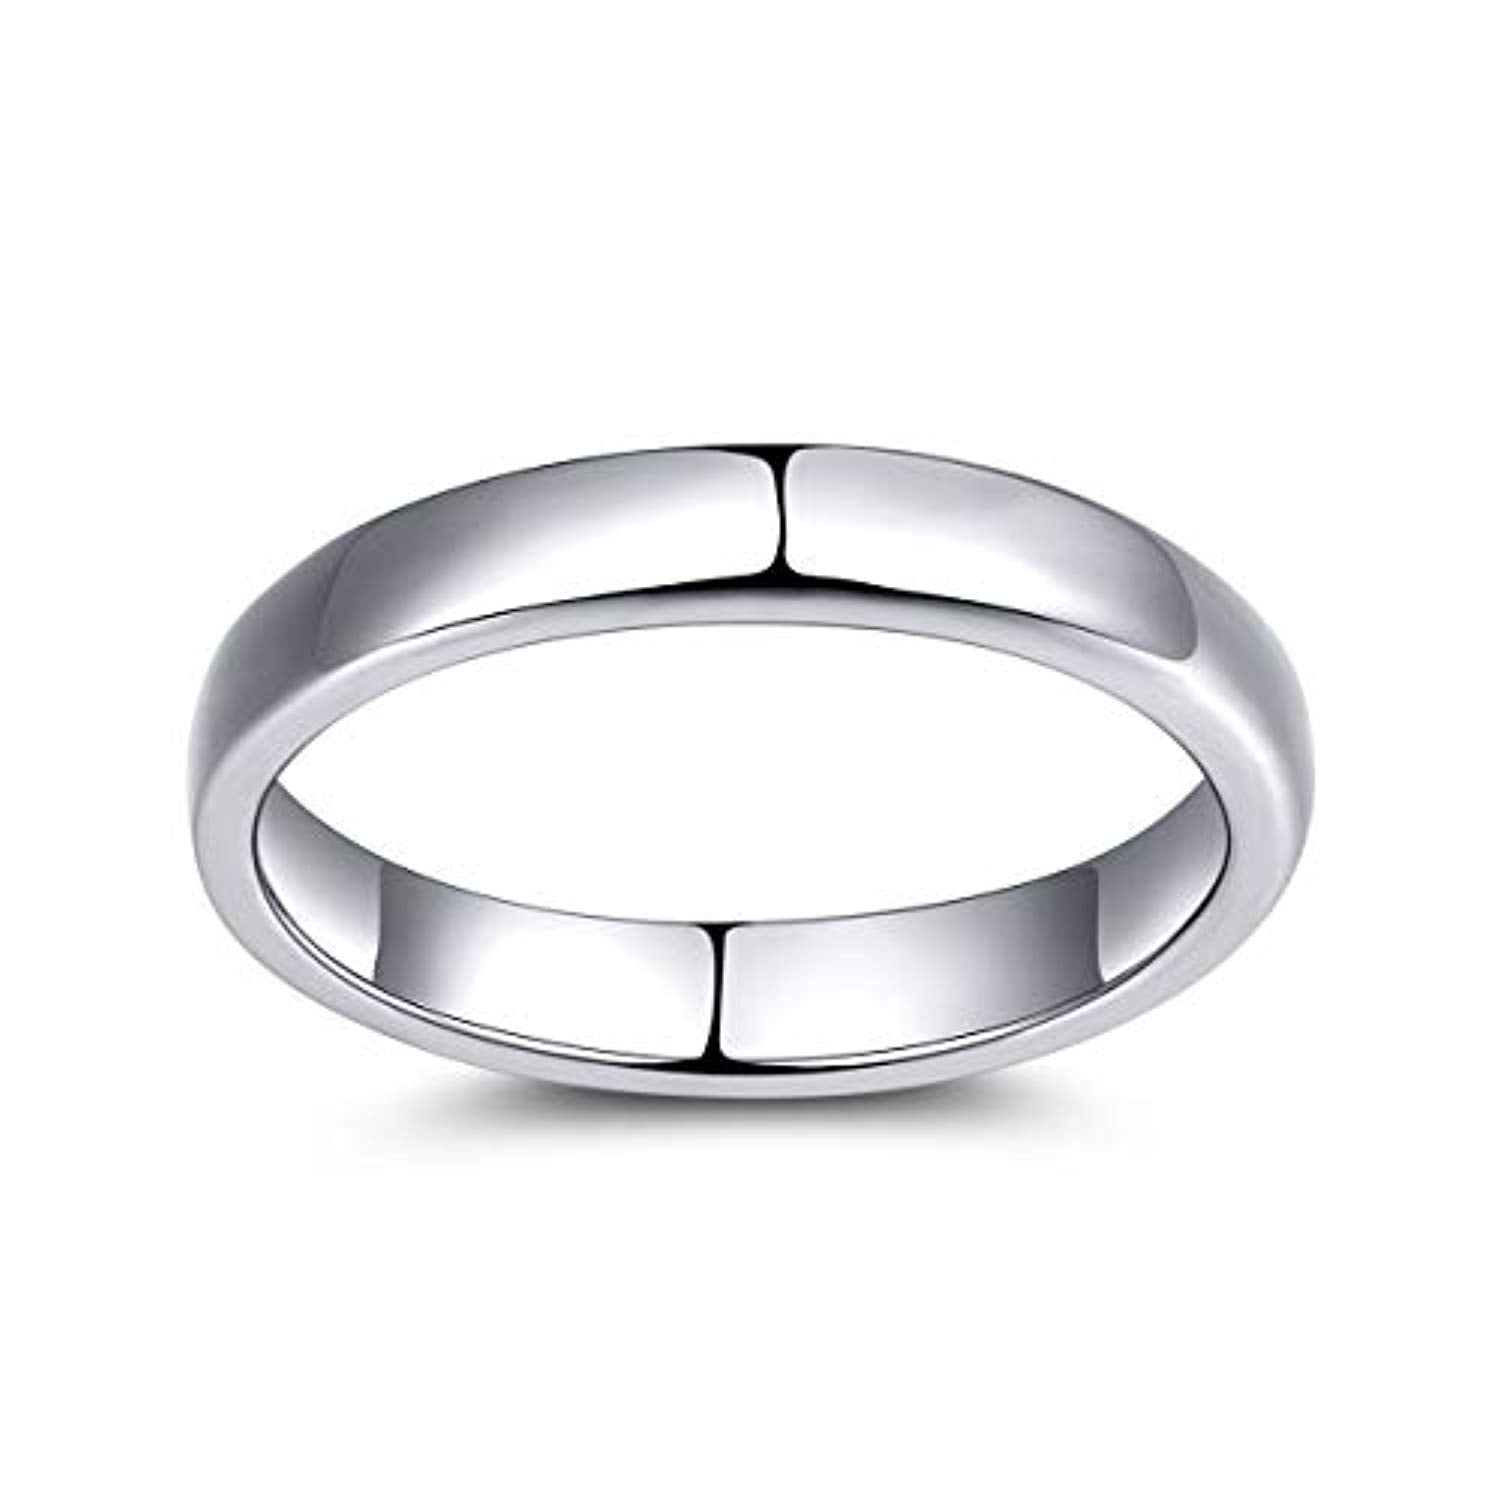 Solid 925 Sterling Silver Band Ring for Men Women Silver Ring Unisex Ring  Jewelry Simple Plain Ring Thub Band Spinner Trend Ring - Etsy